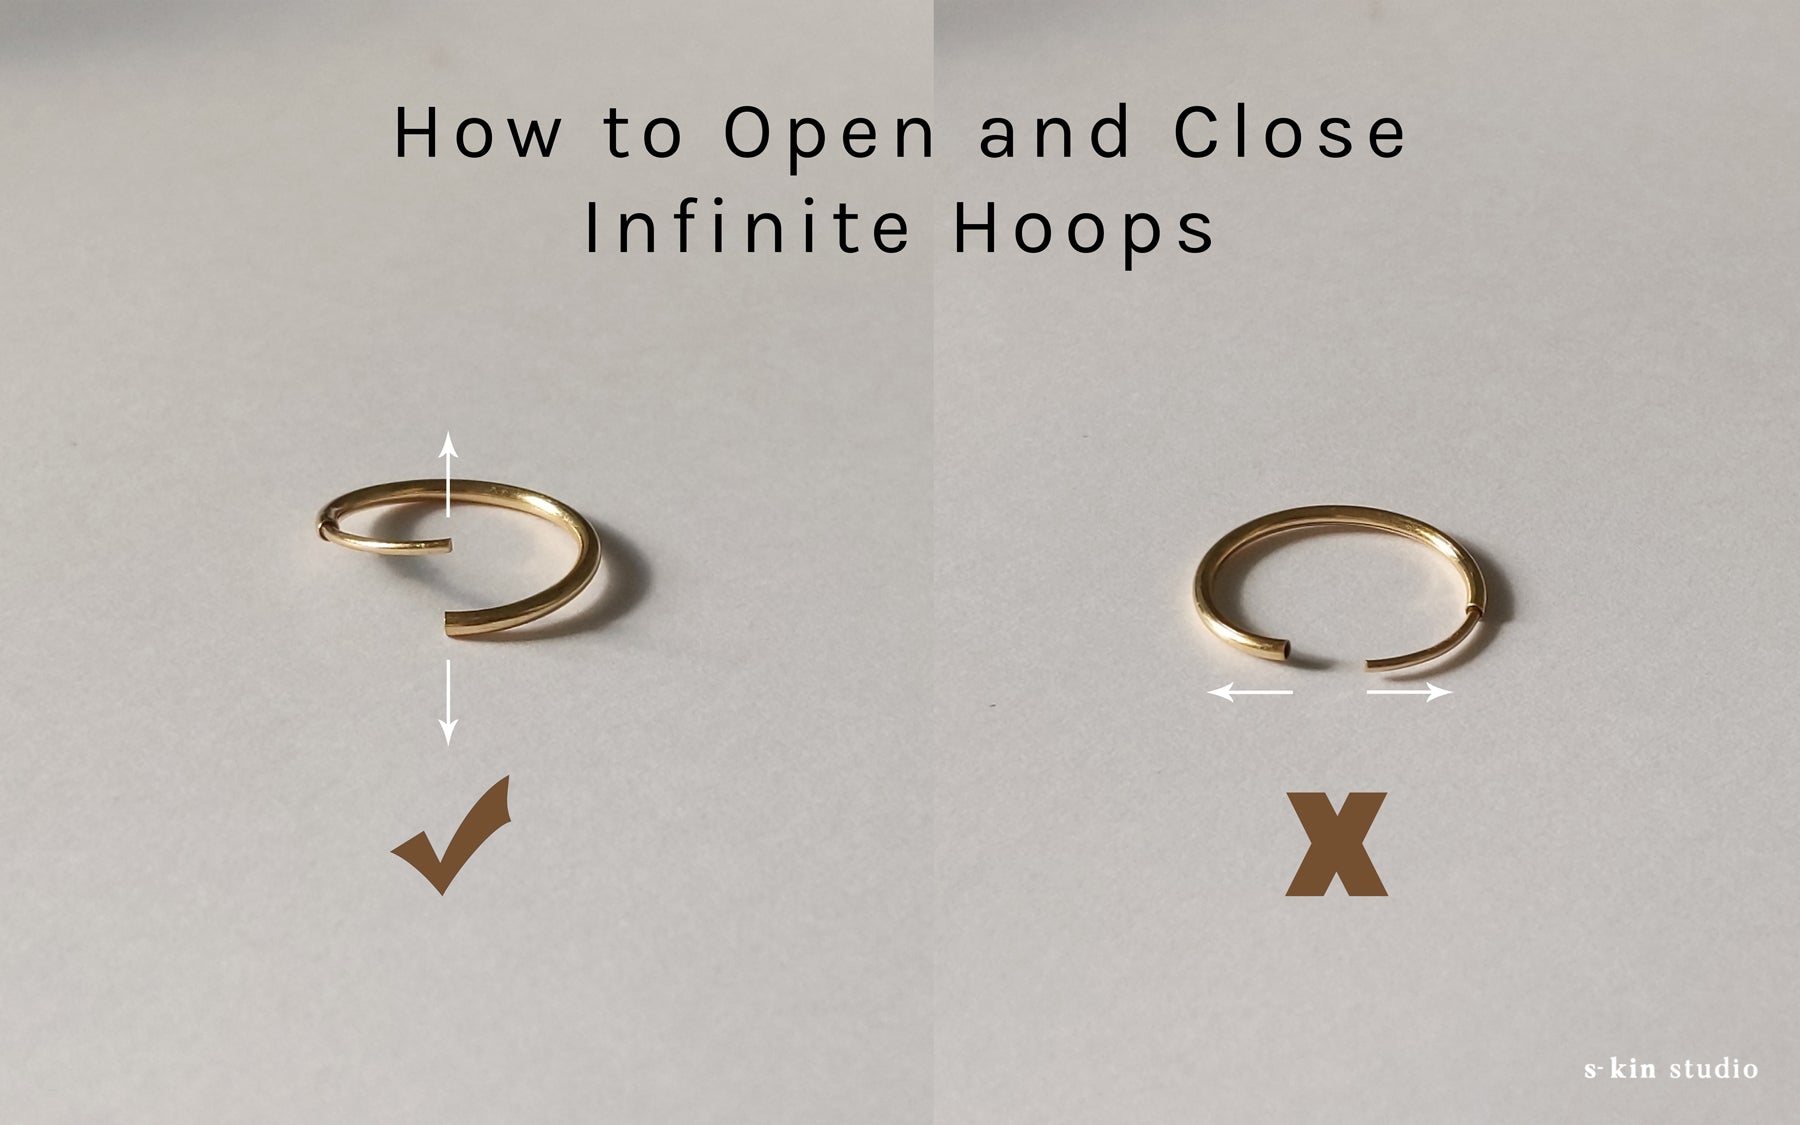 8 Best Infinity Hoops - Must Read This Before Buying